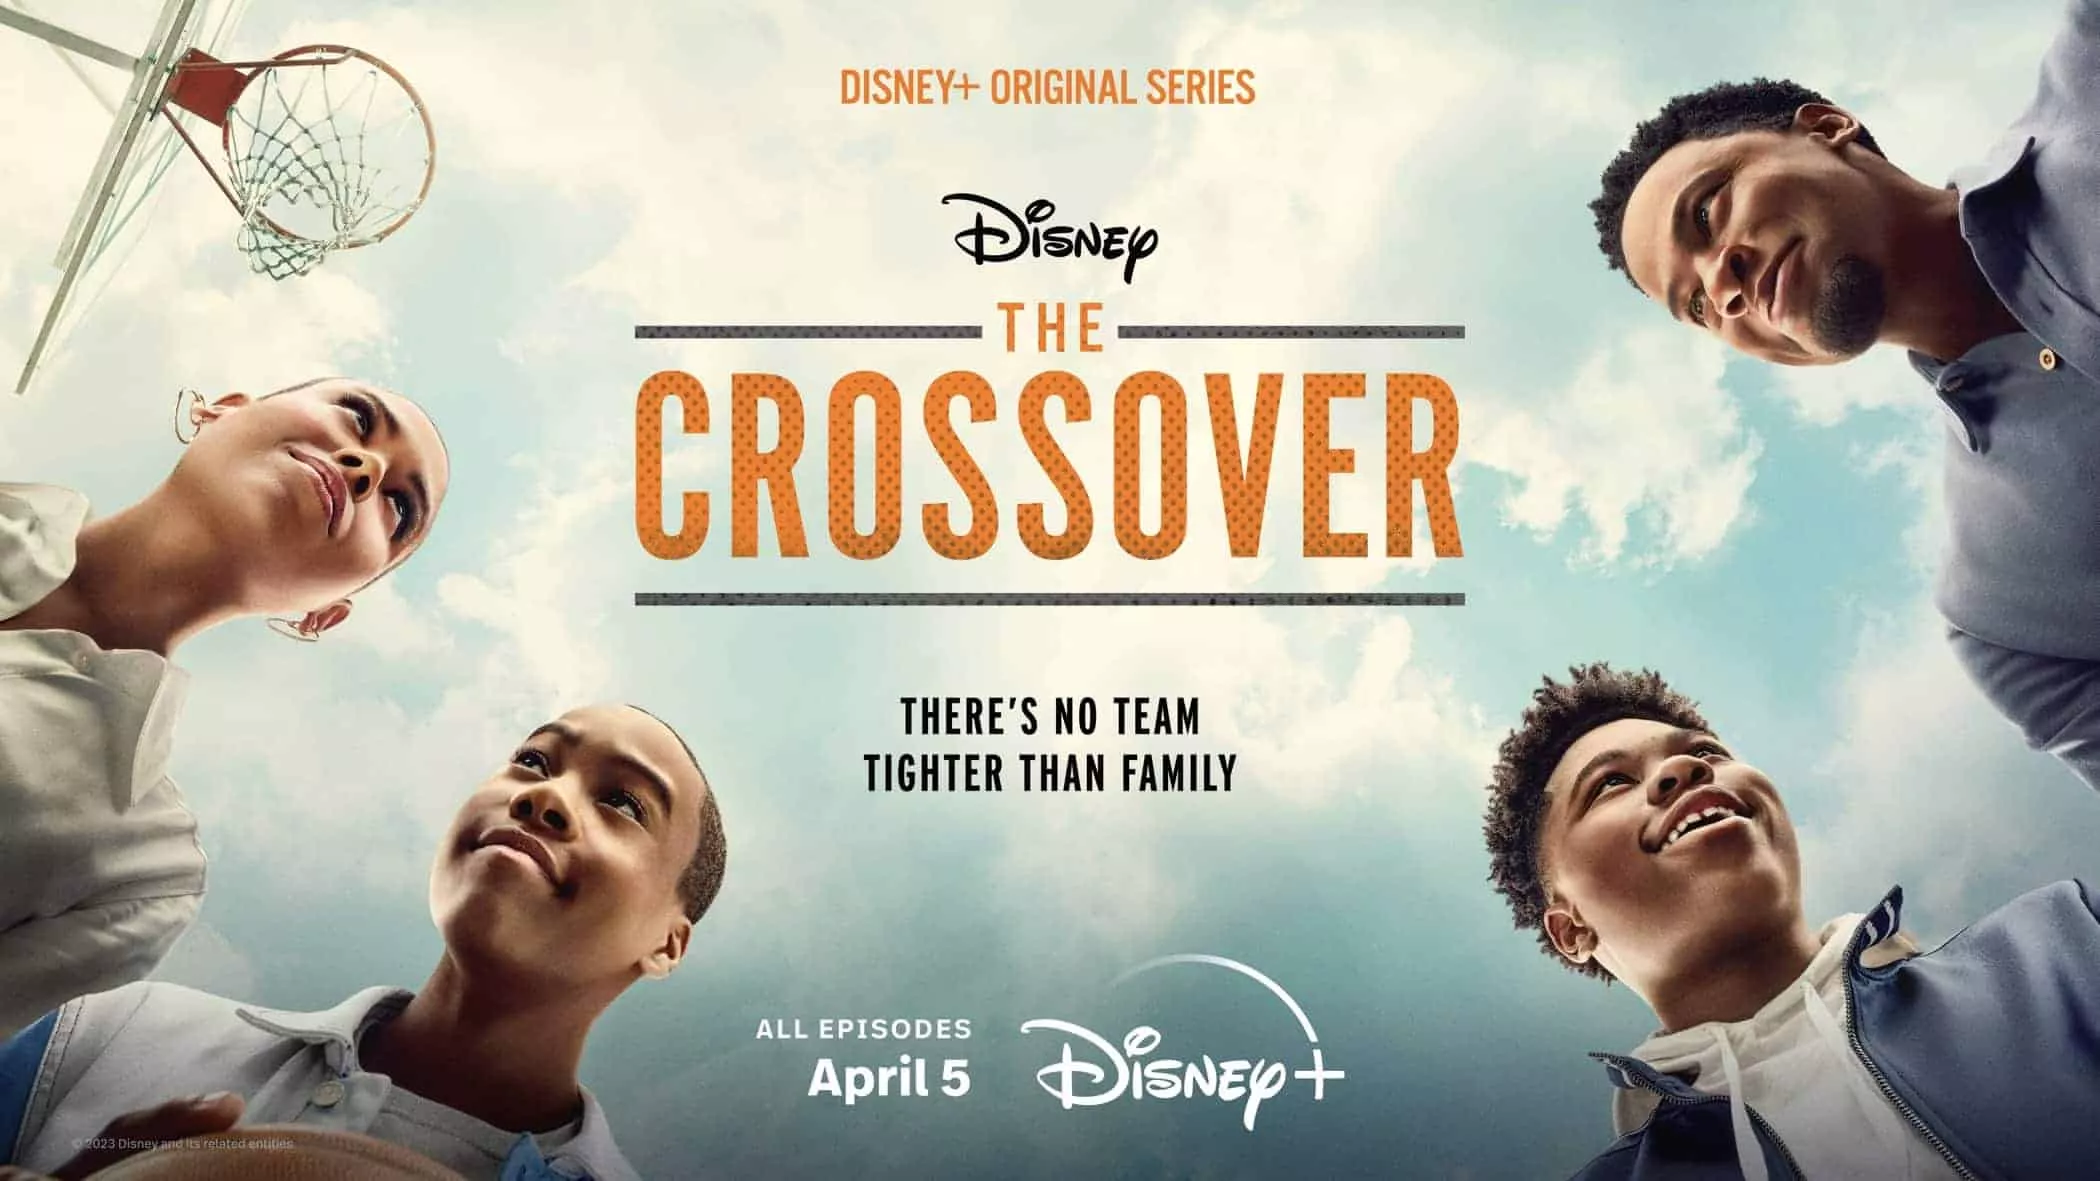 The Crossover | Official Trailer | Disney+